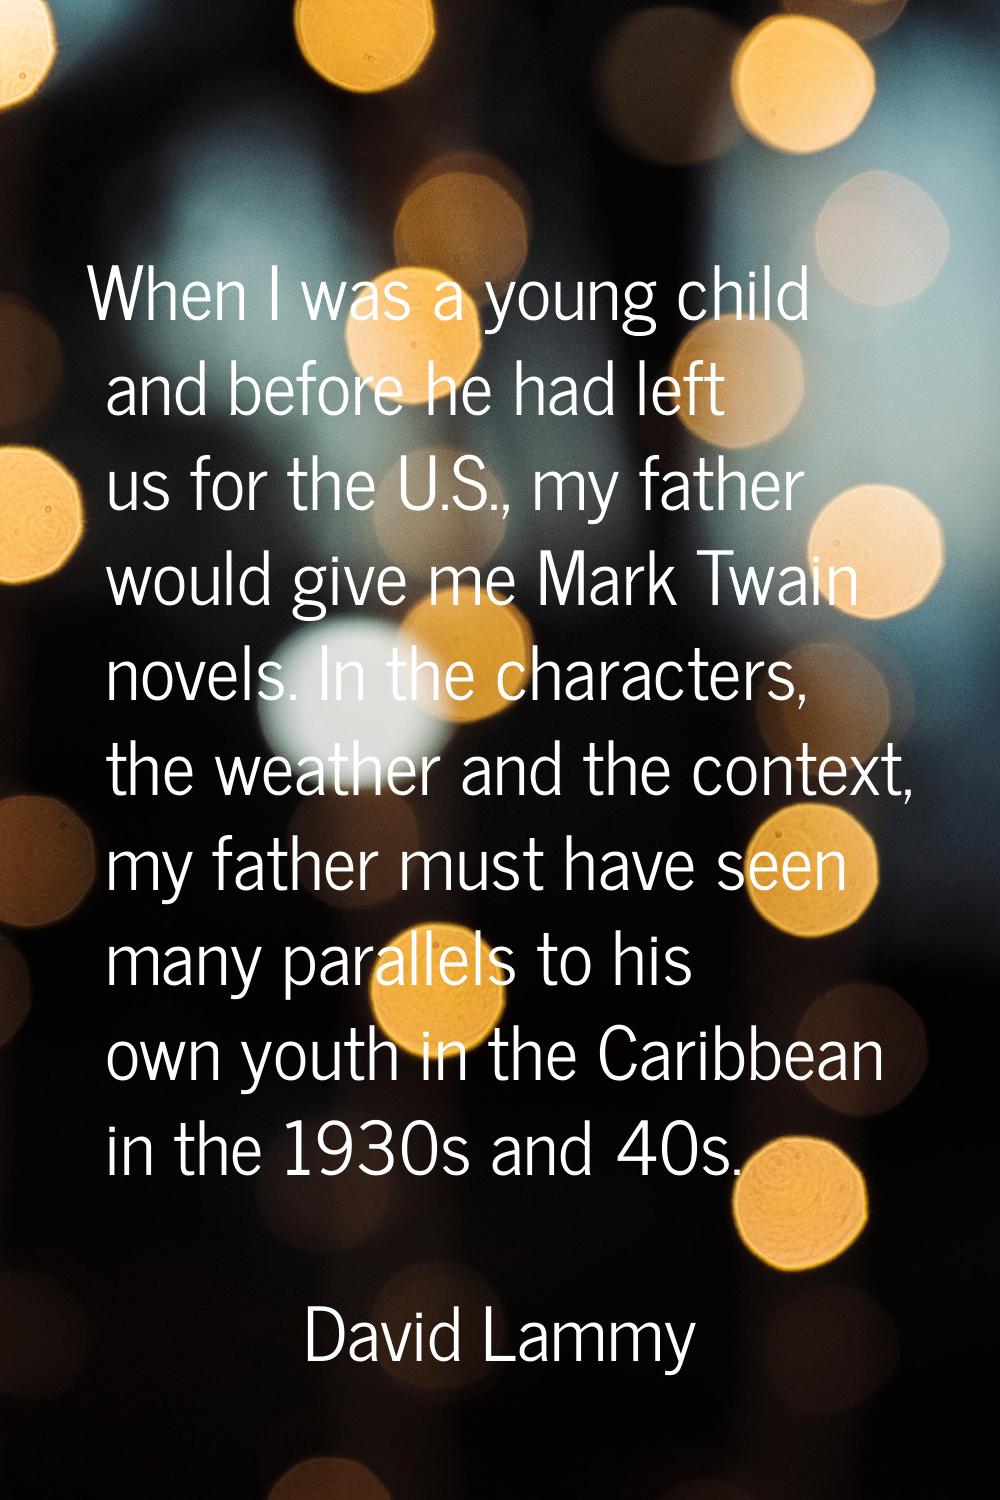 When I was a young child and before he had left us for the U.S., my father would give me Mark Twain